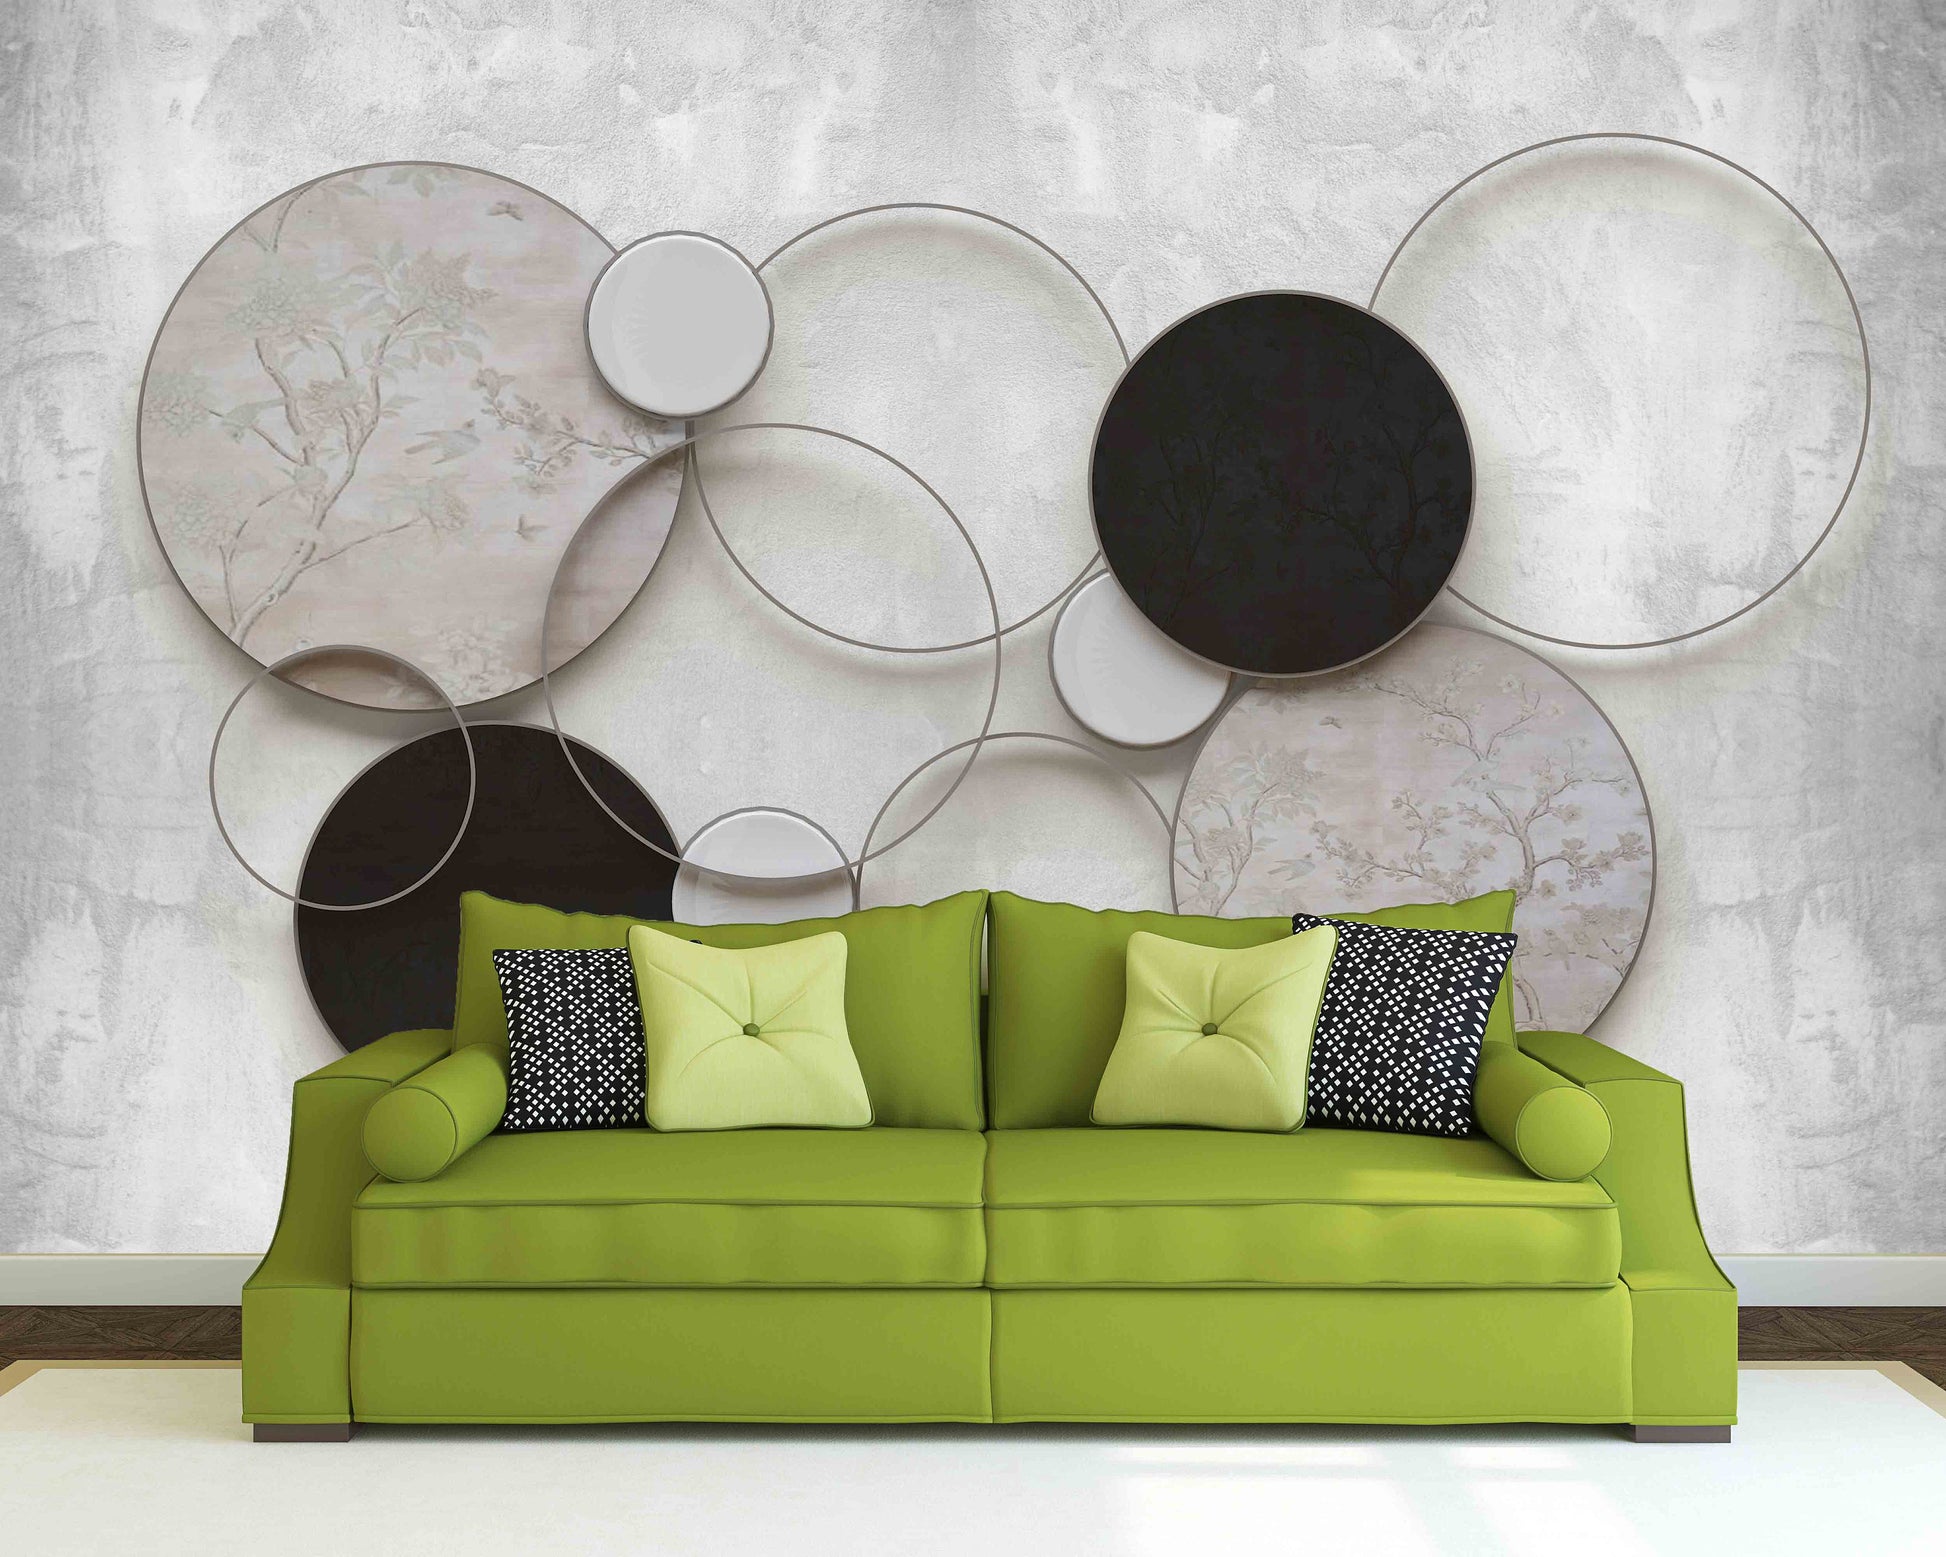 Geometric wallpaper 3d wall mural Abstract wallpaper Peel and stick wallpaper Photo wallpaper Black and white art removable wallpaper